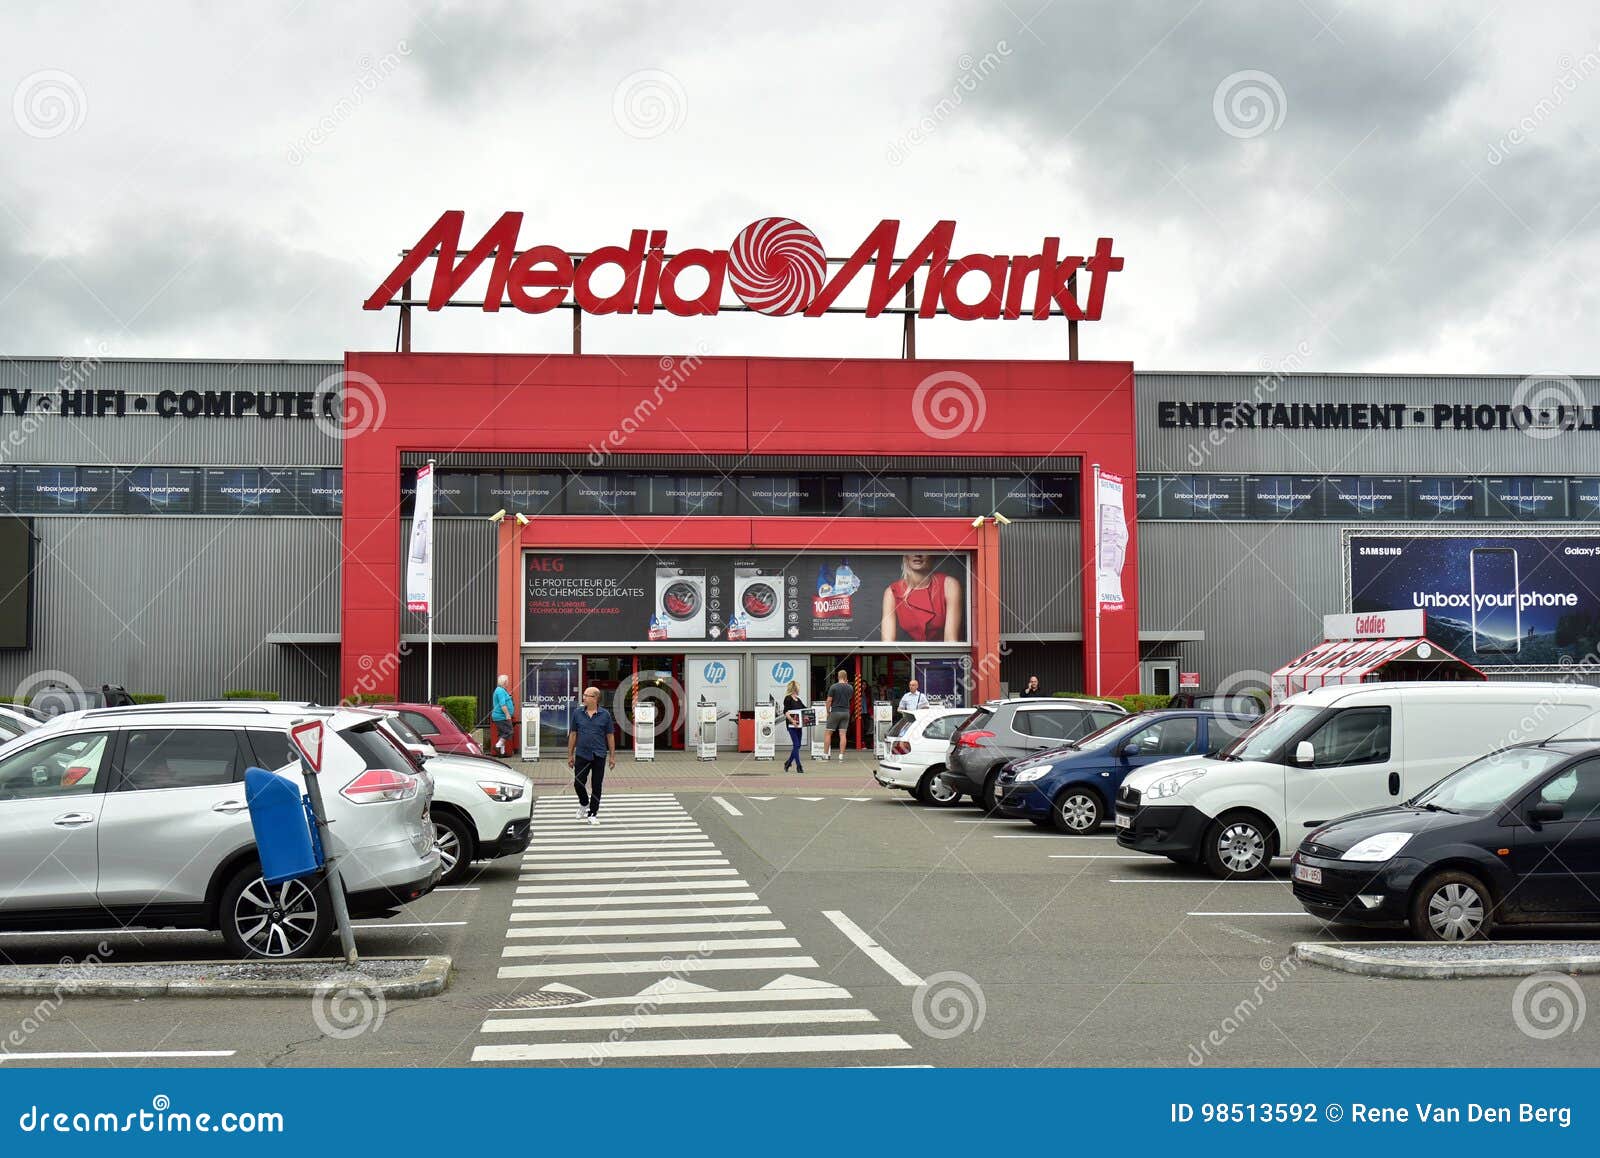 Amsterdam, Media Markt is a German chain of stores selling …